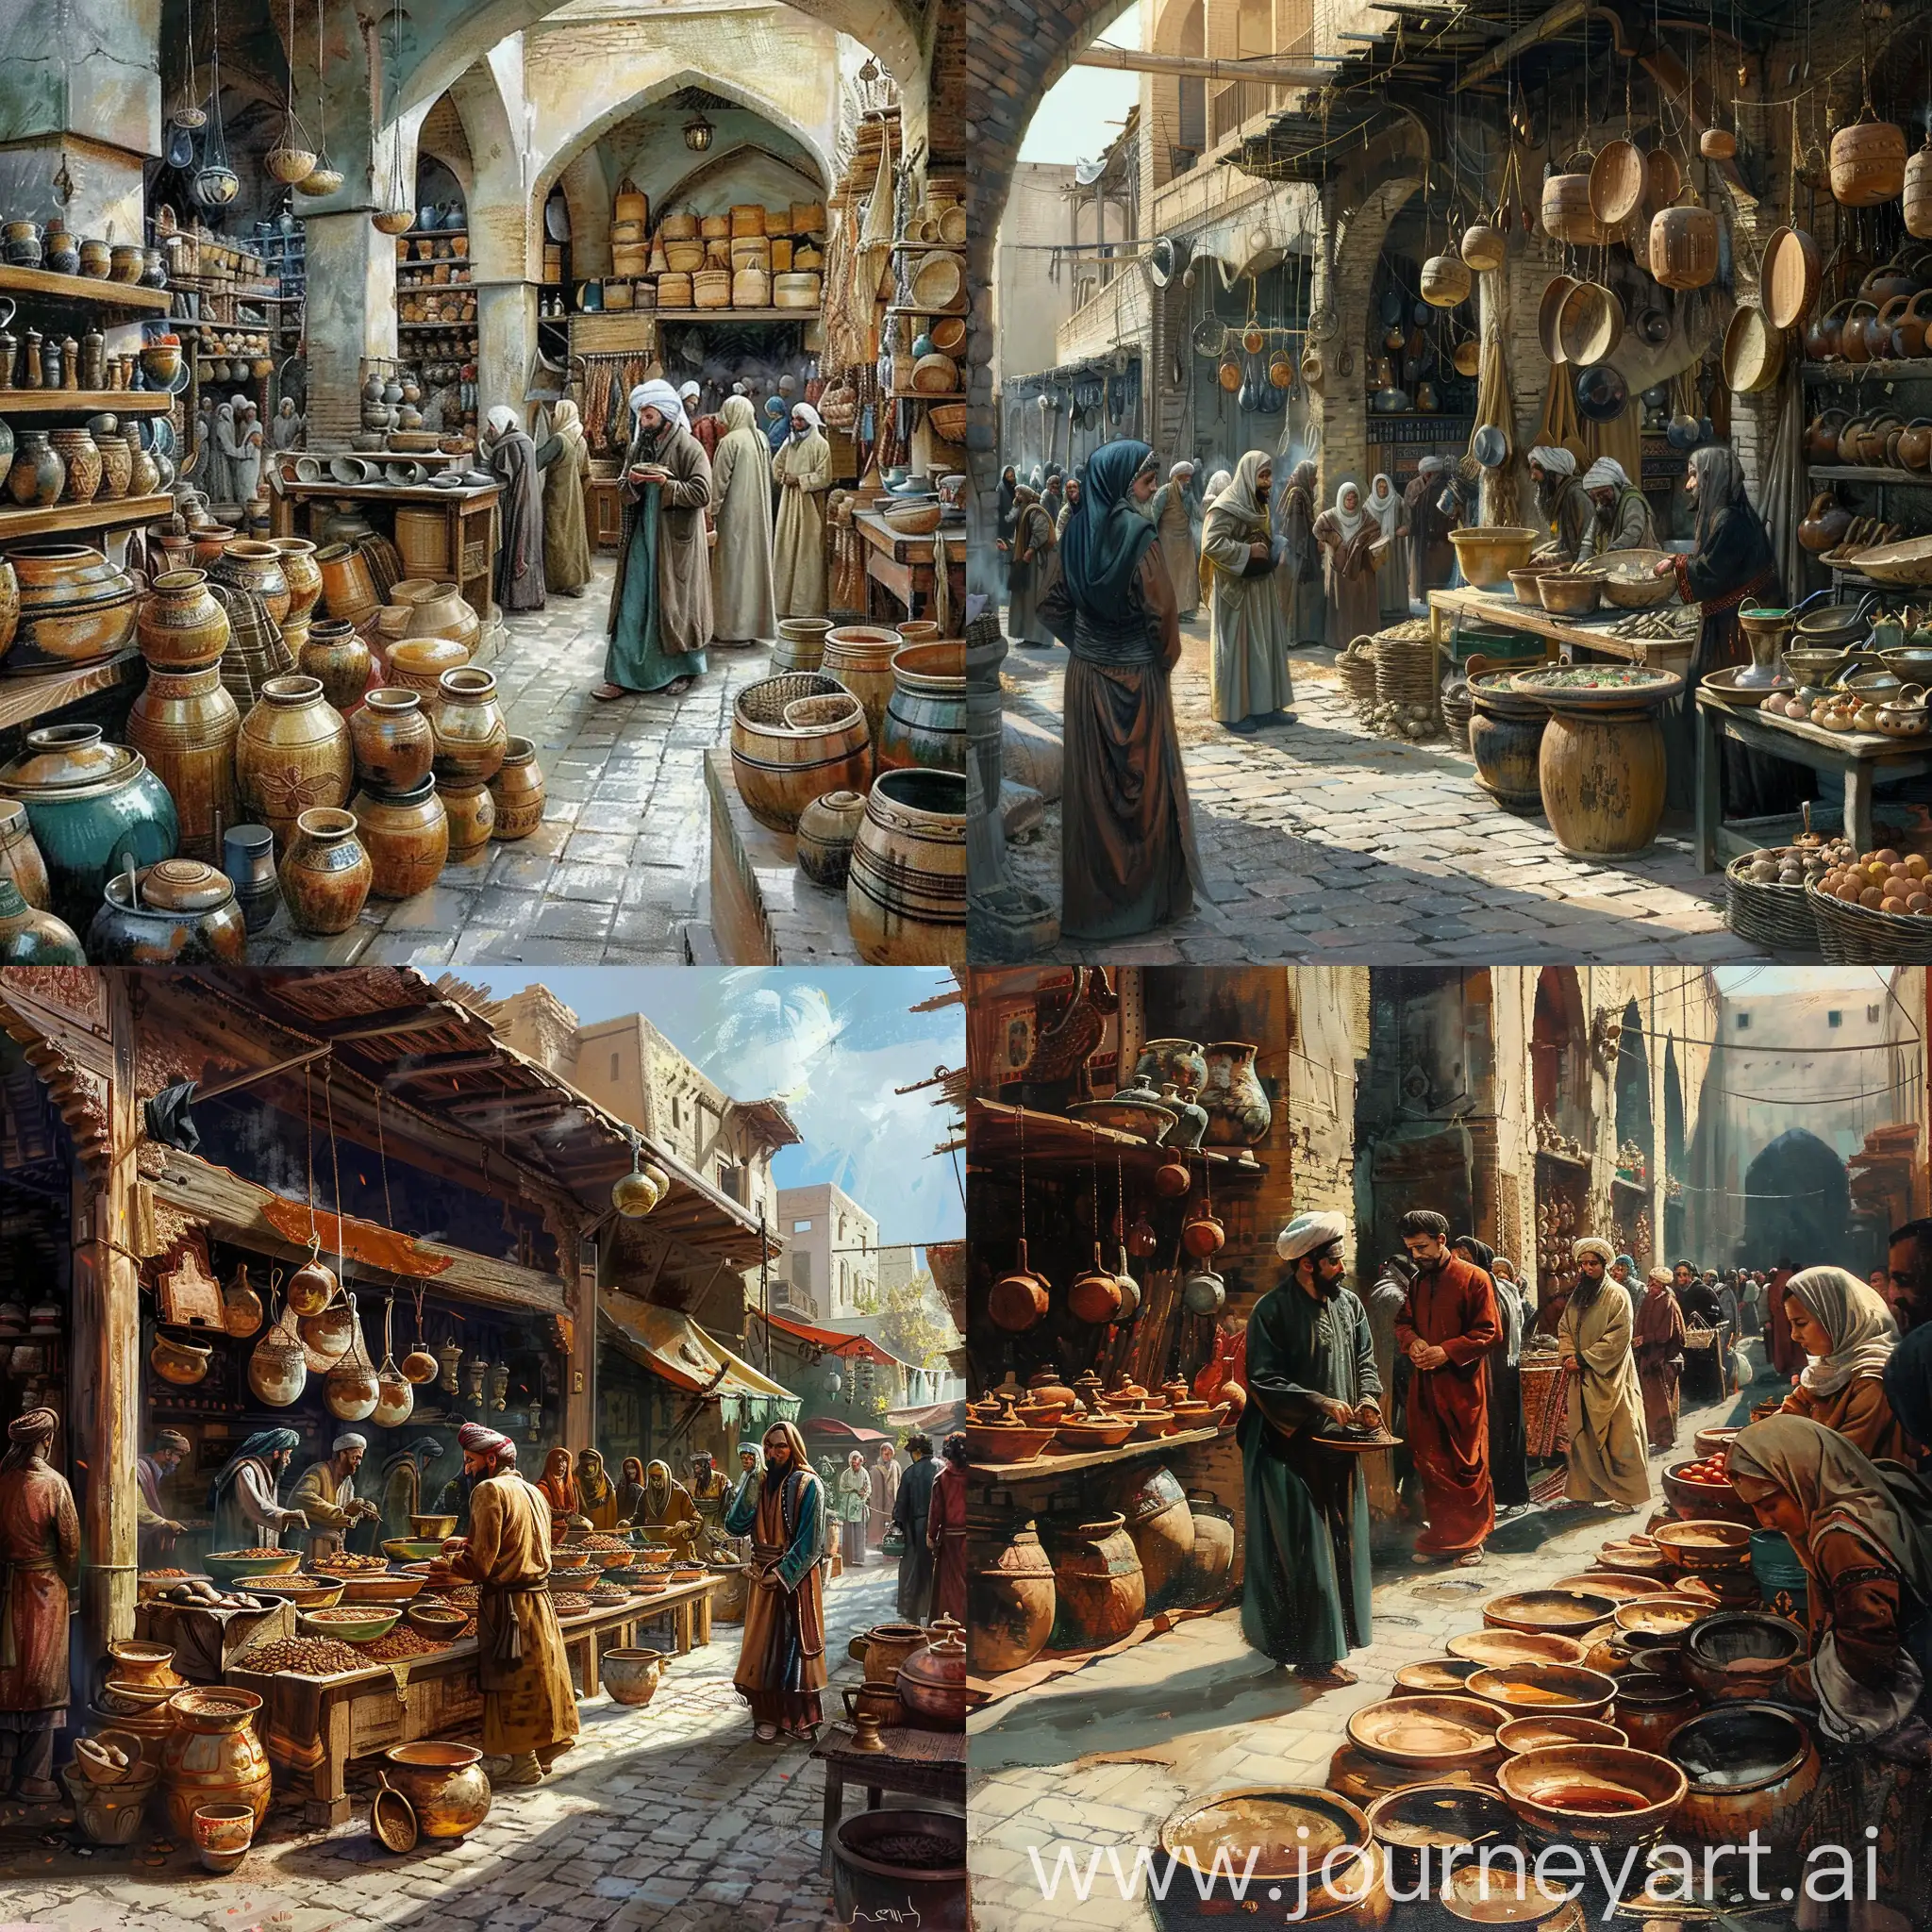 There is a beautiful and clean ancient Iranian city, and in it, there is a marketplace filled with wooden cooking utensils. People, dressed in exquisite attire, are engrossed in watching the scene.